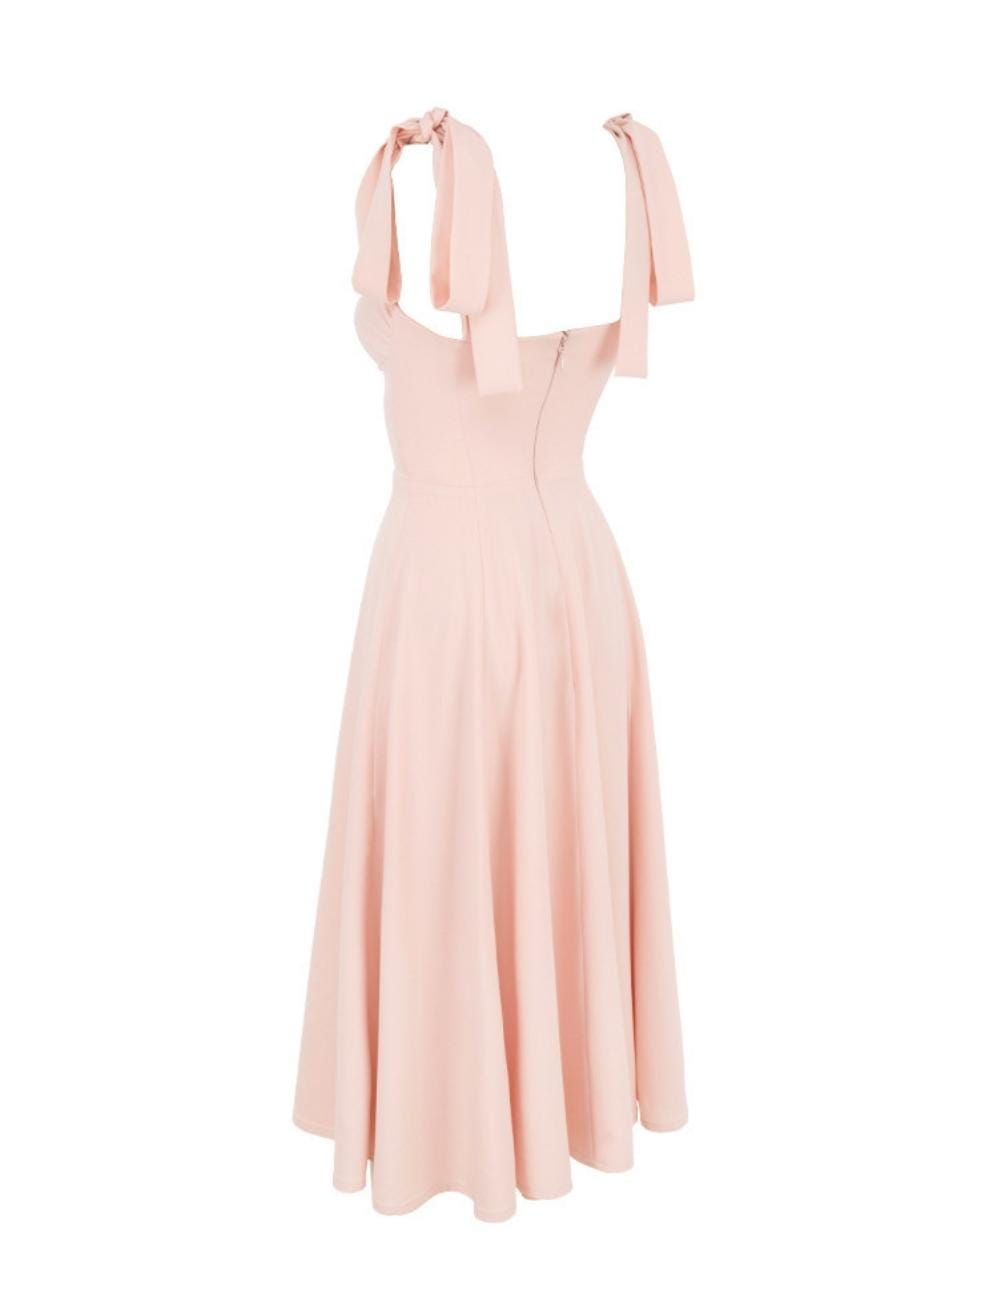 Alicia Dress in Pink